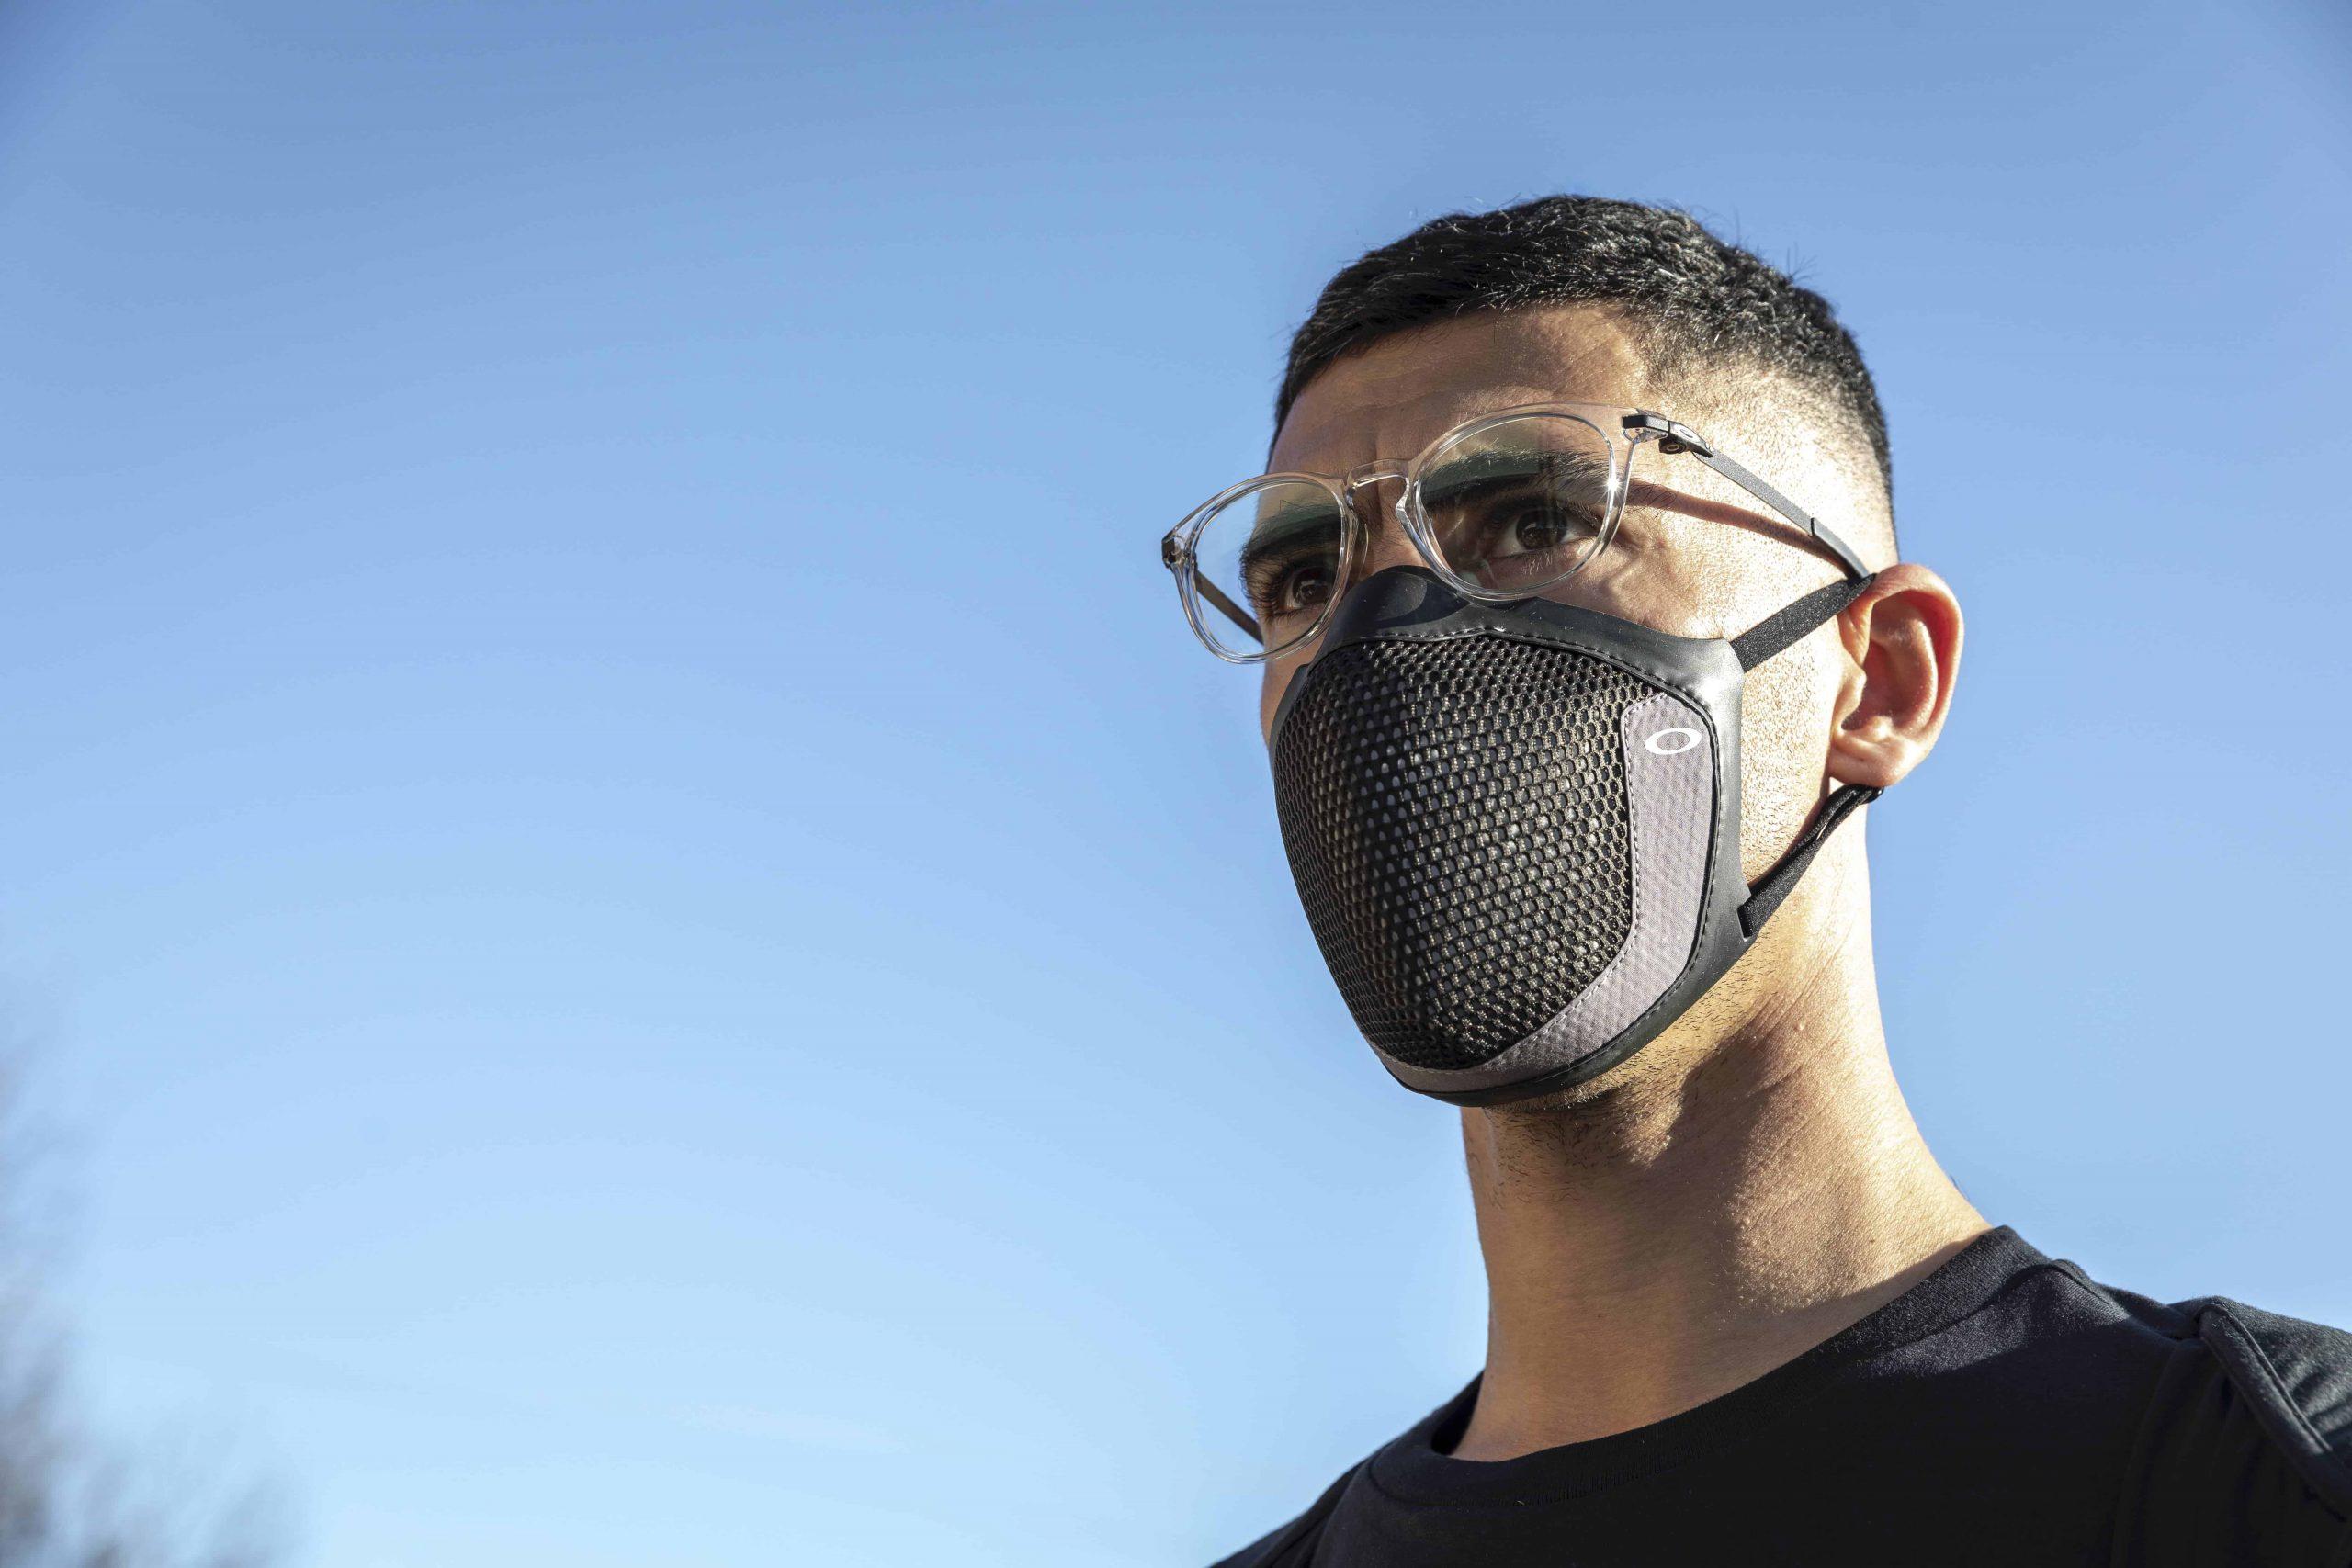 Mask envy is a thing of the past with the new Oakley MSK3